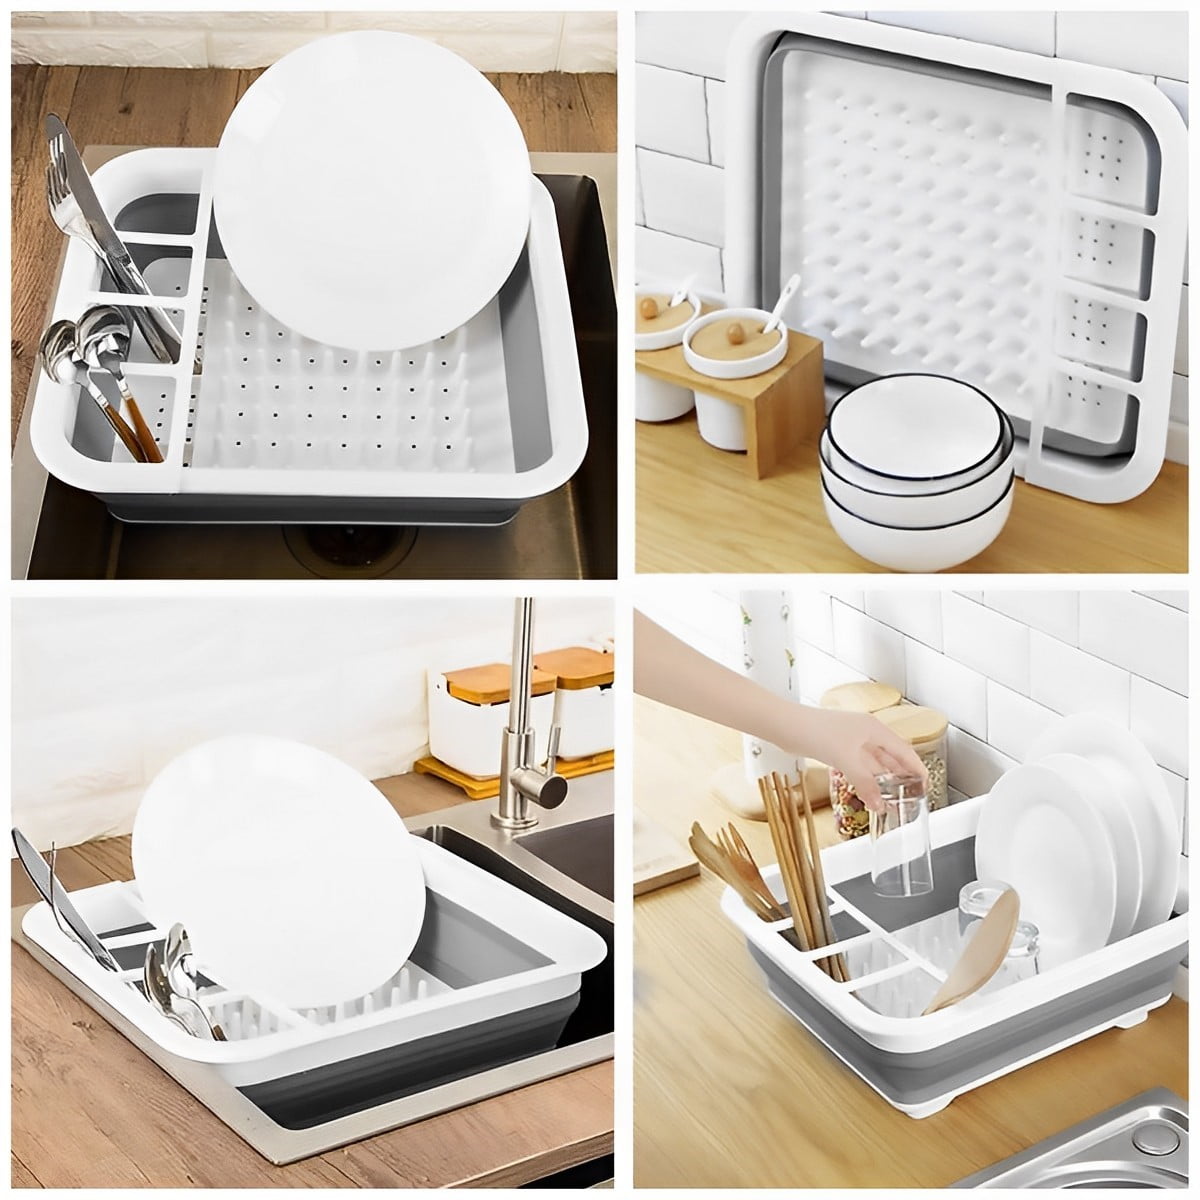 BUTORY Collapsible Dish Drying Rack - Popup and Collapse for Easy Storage,  Drain Water Directly into The Sink,Sectional Cutlery and Utensil